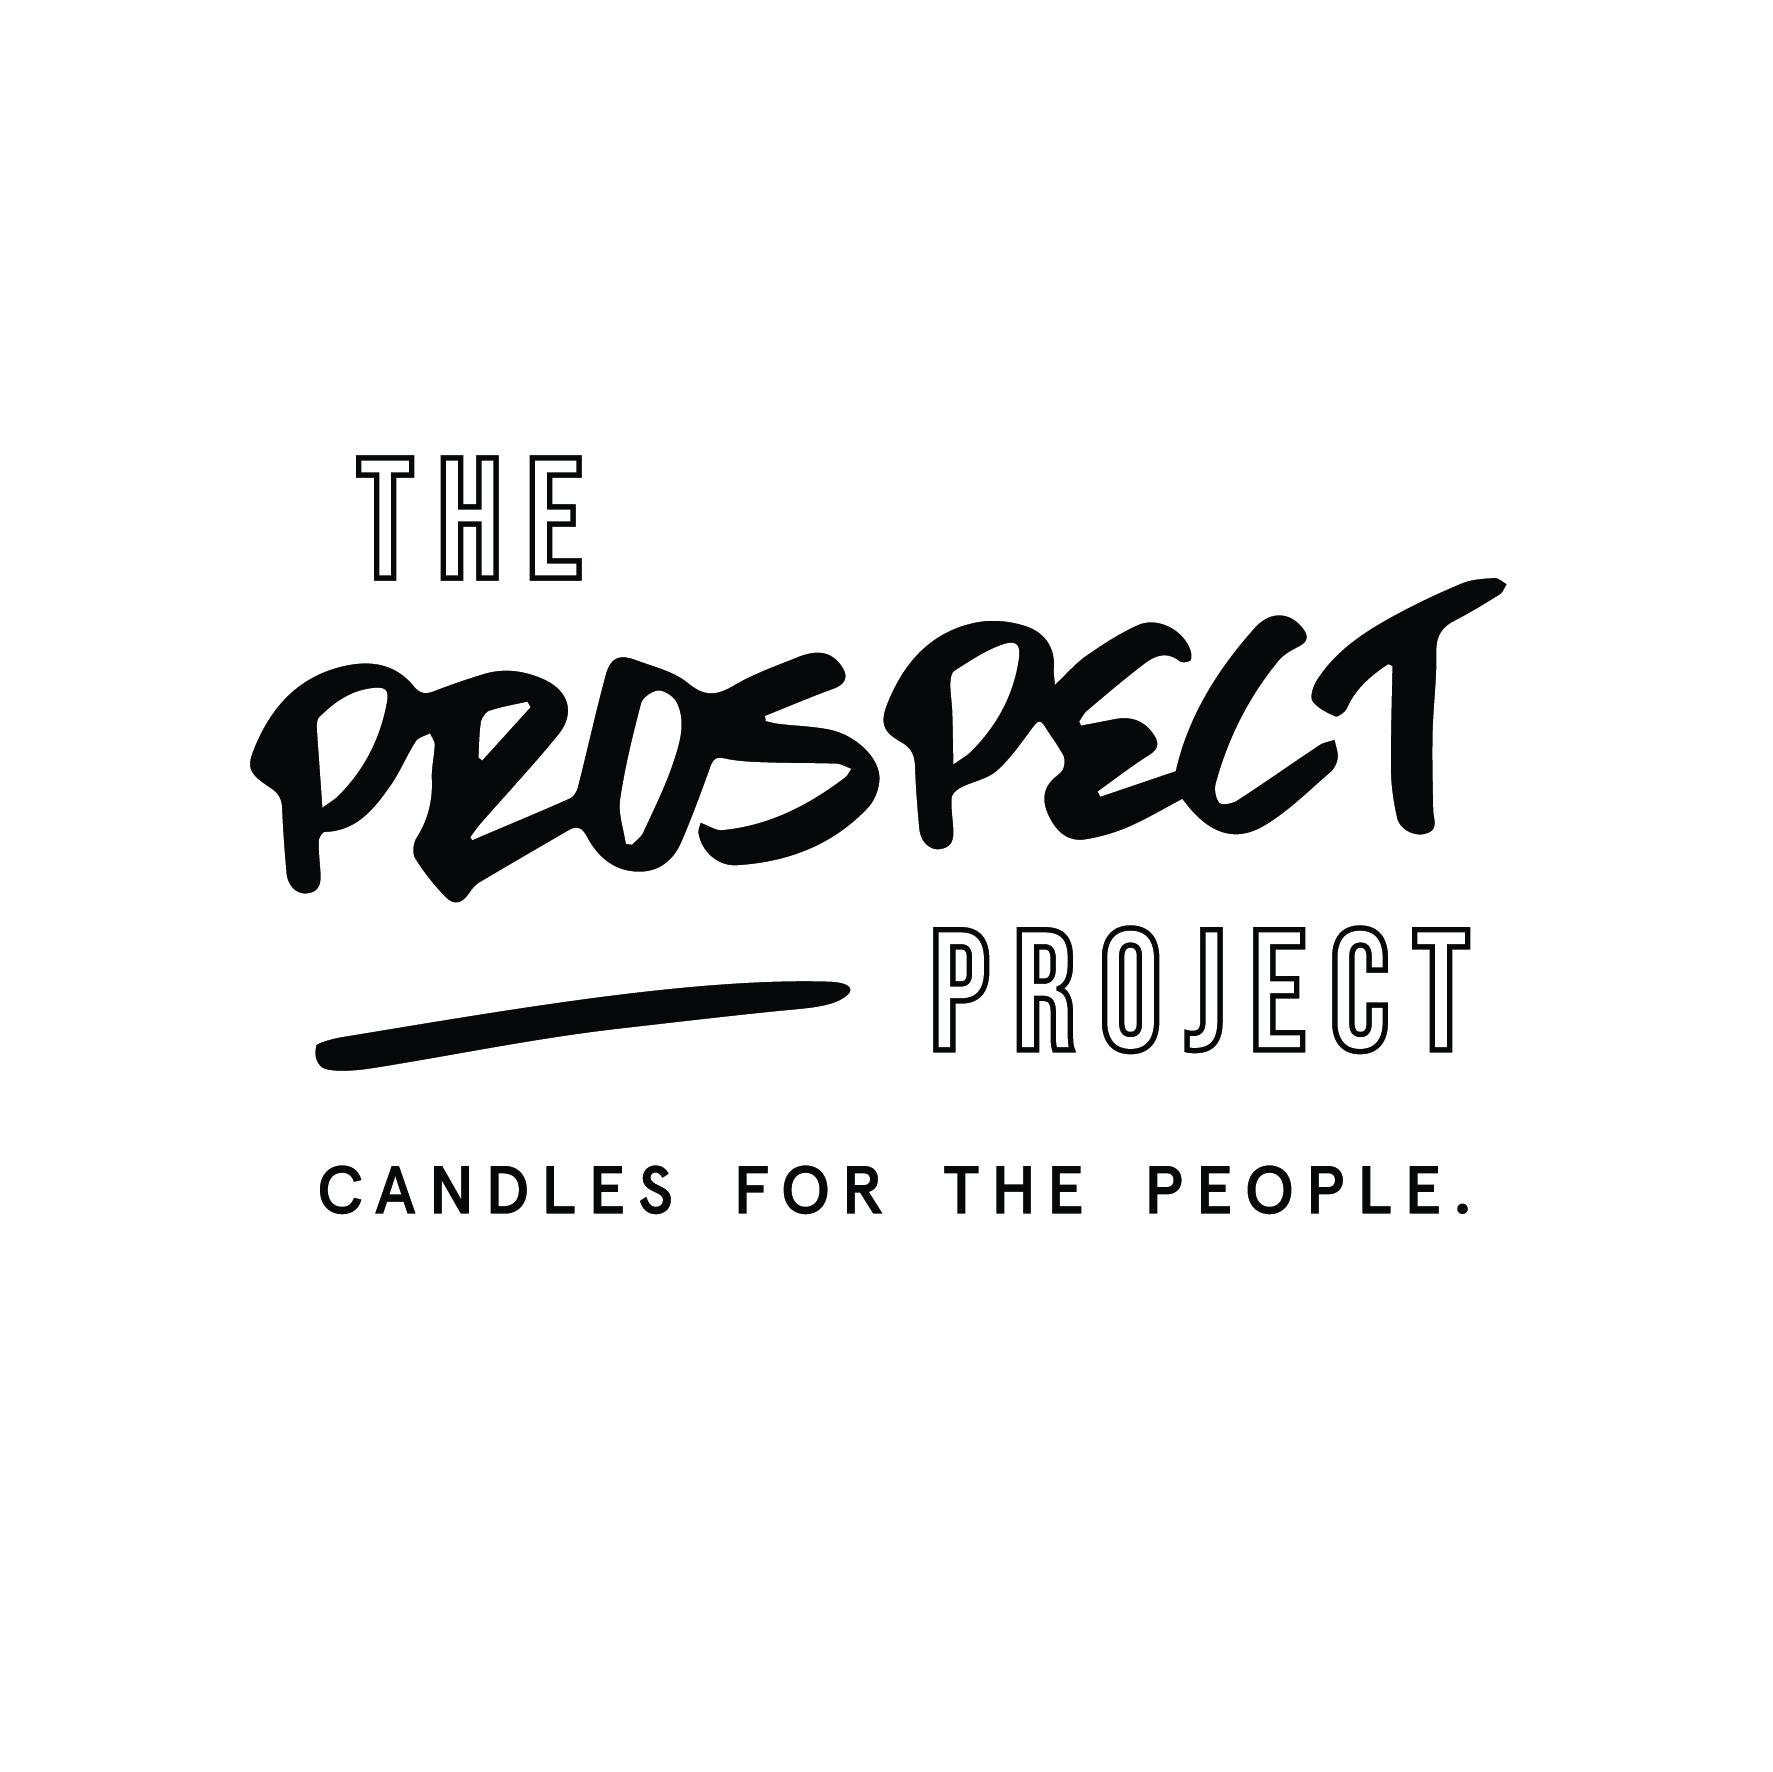 Citrus, Woody, Contemporary / Modern, Inoko, The Prospect Project Candles